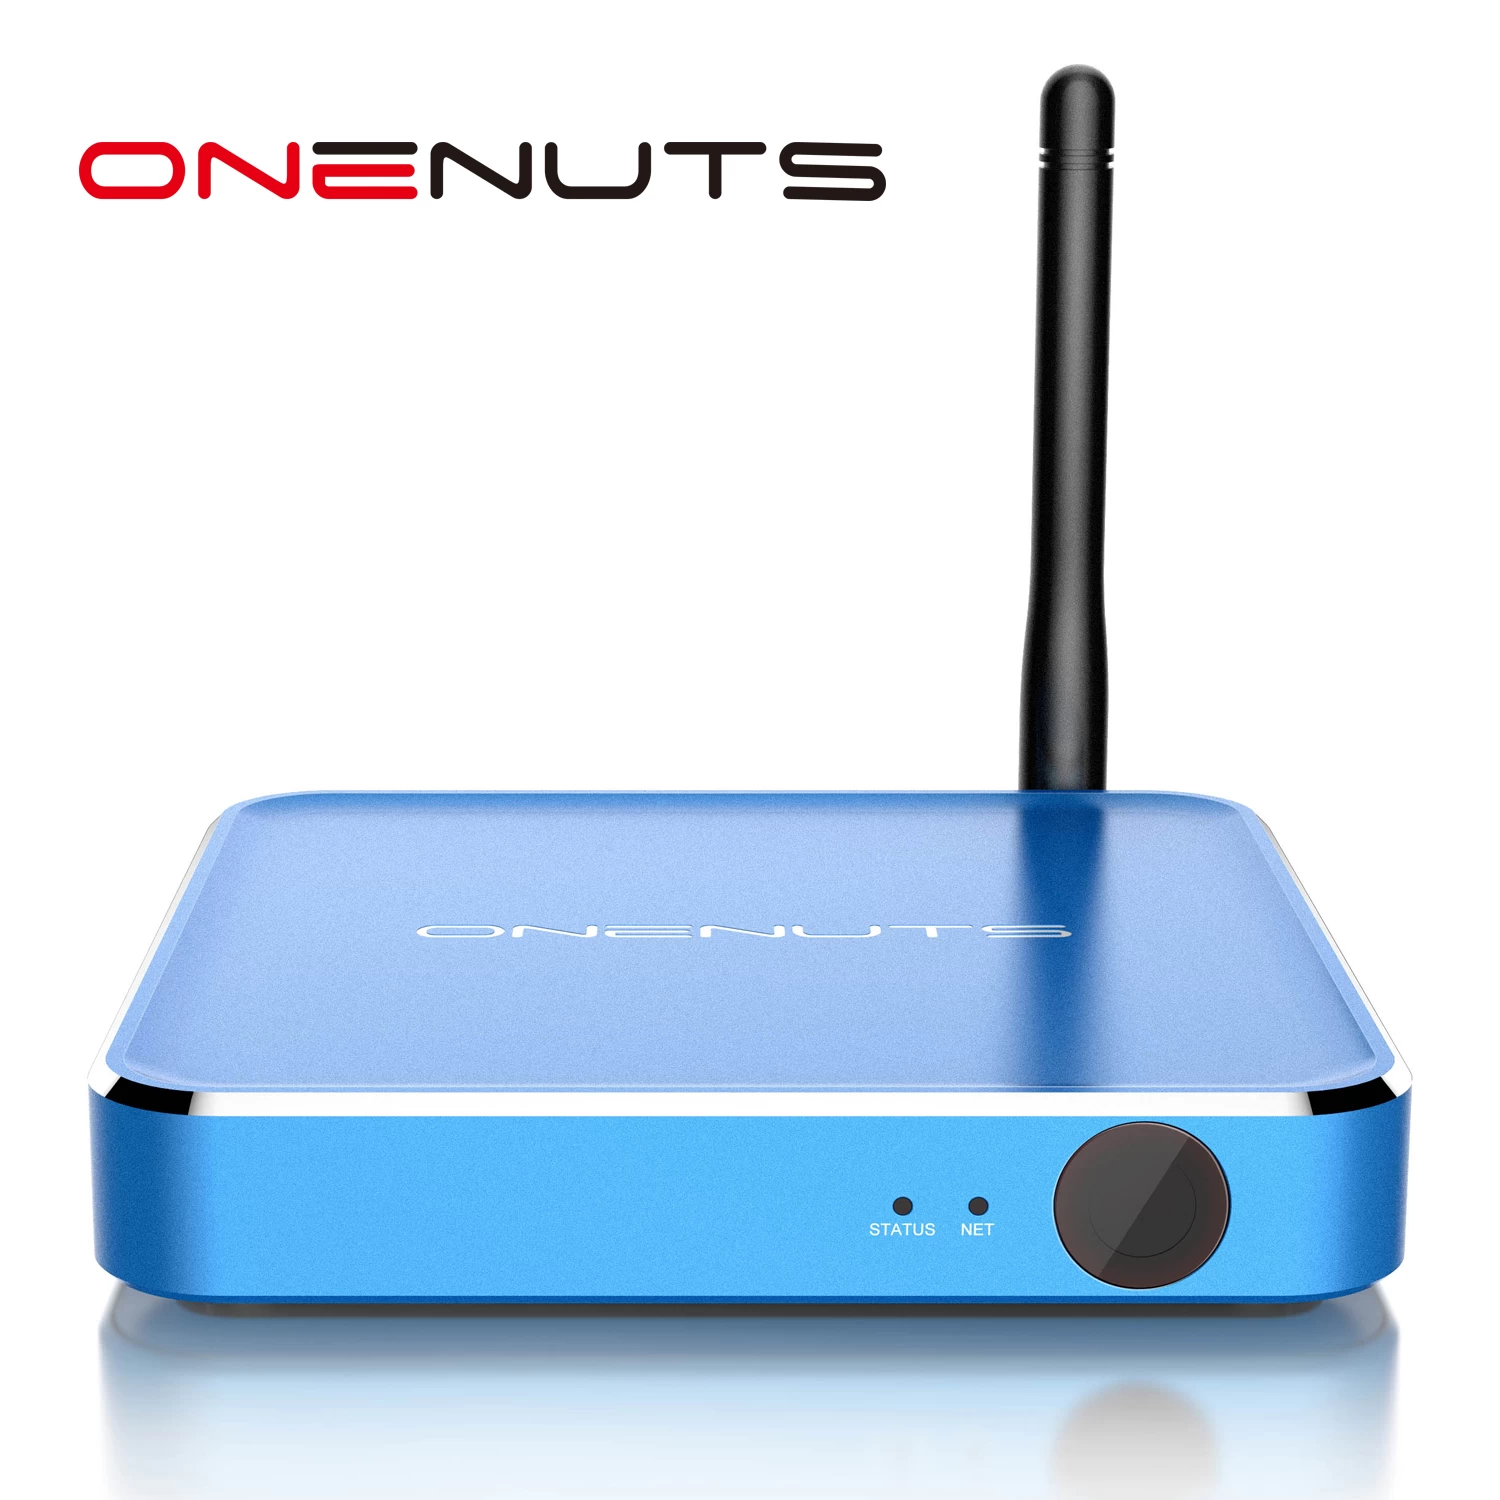 Android TV Box vend en gros, fournisseur Chine Android TV Box